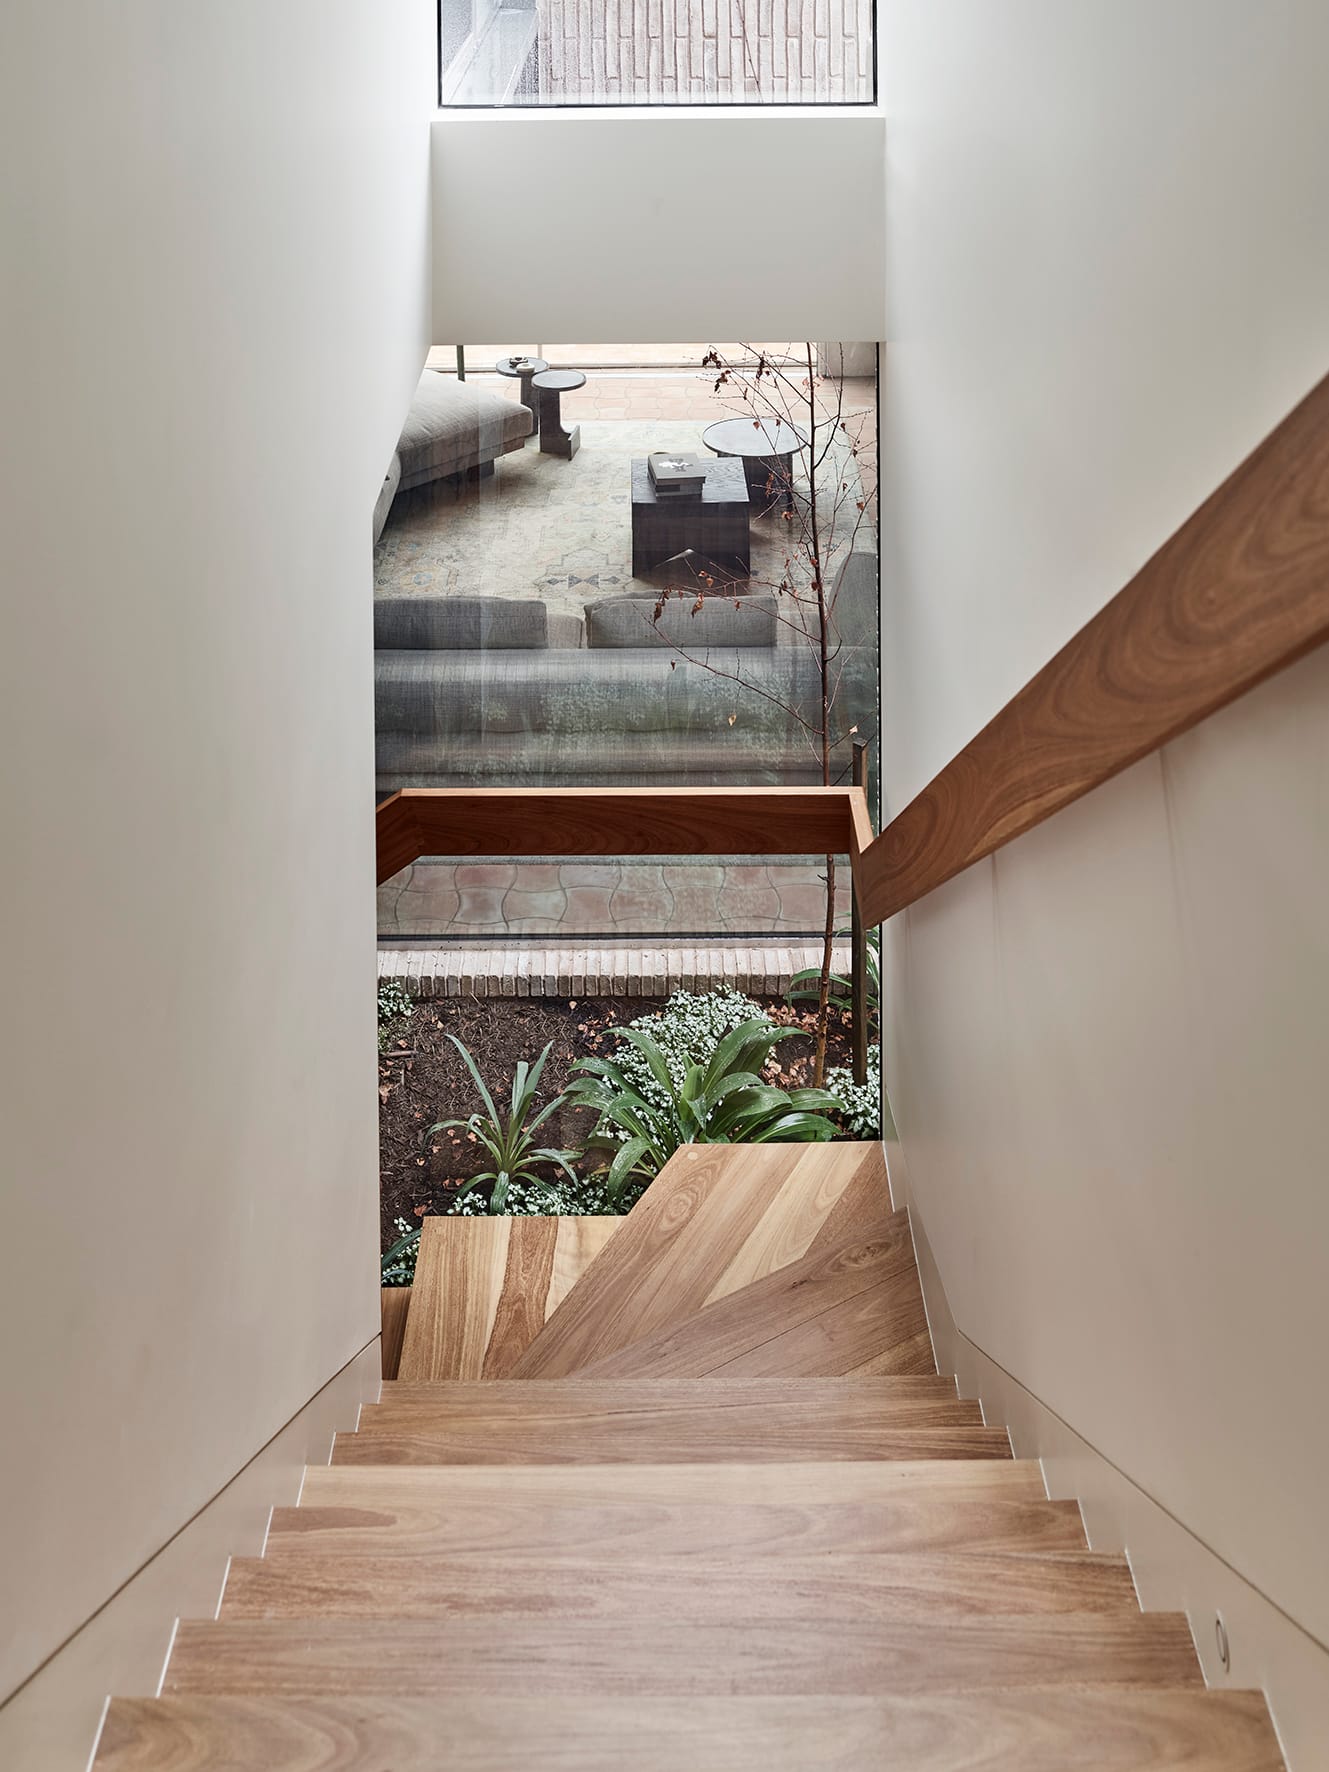 Terra Firma by RobsonRak showing the timber staircase and view to the internal garden